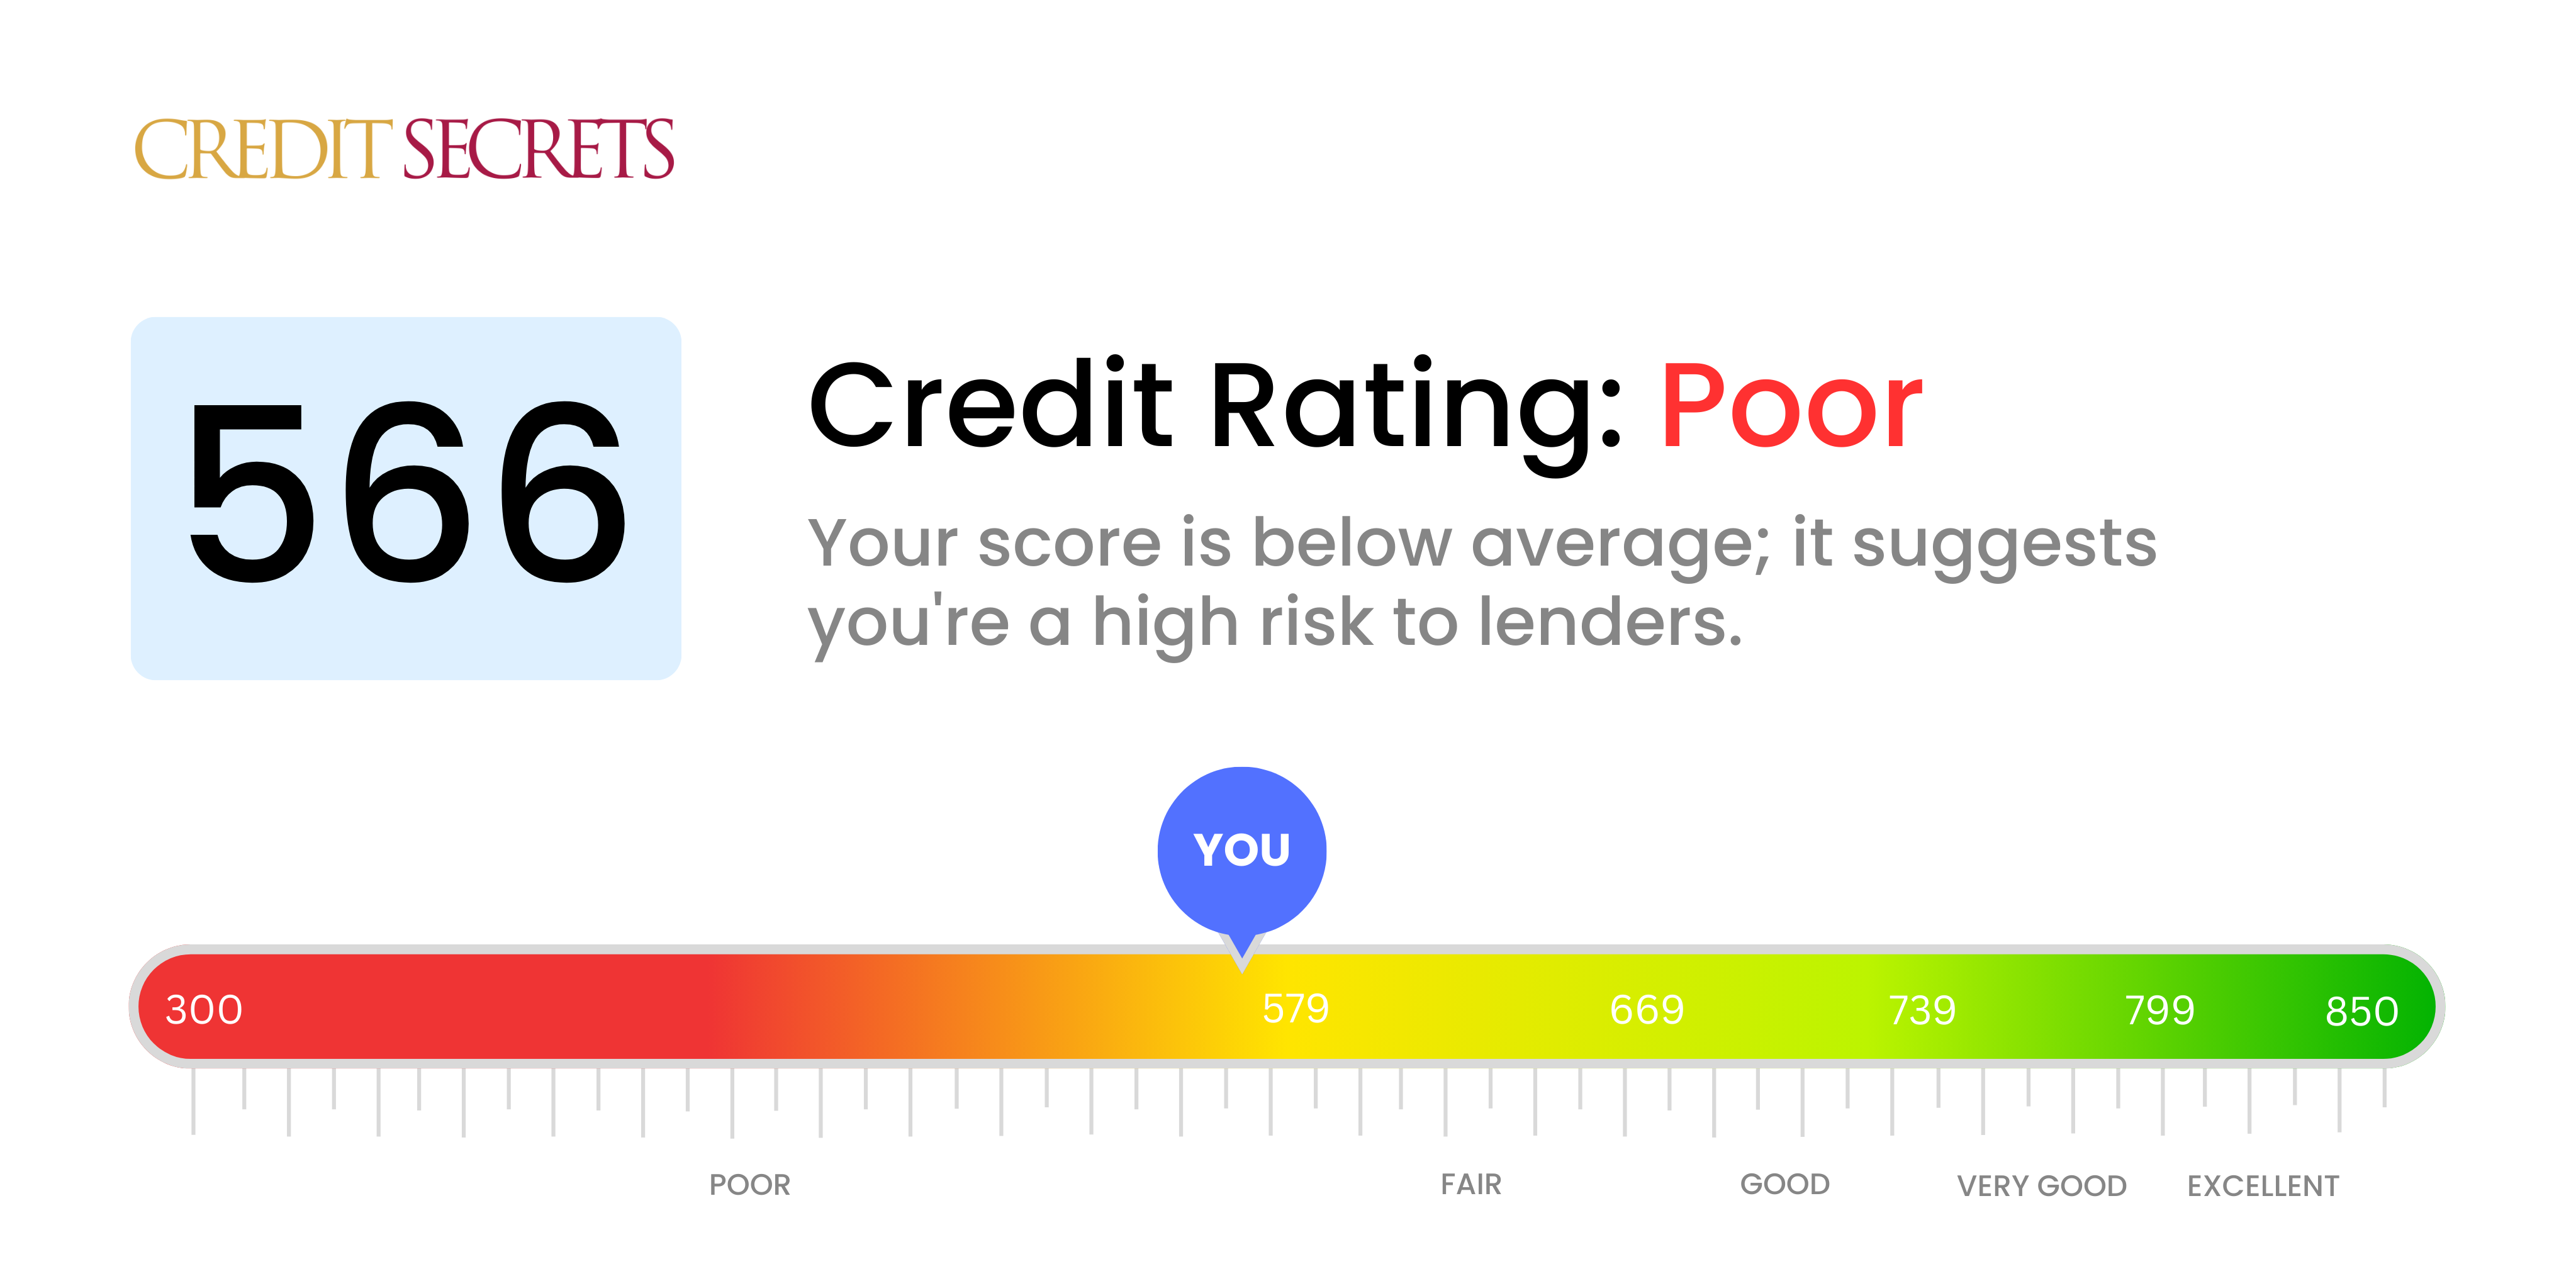 Is 566 a good credit score?